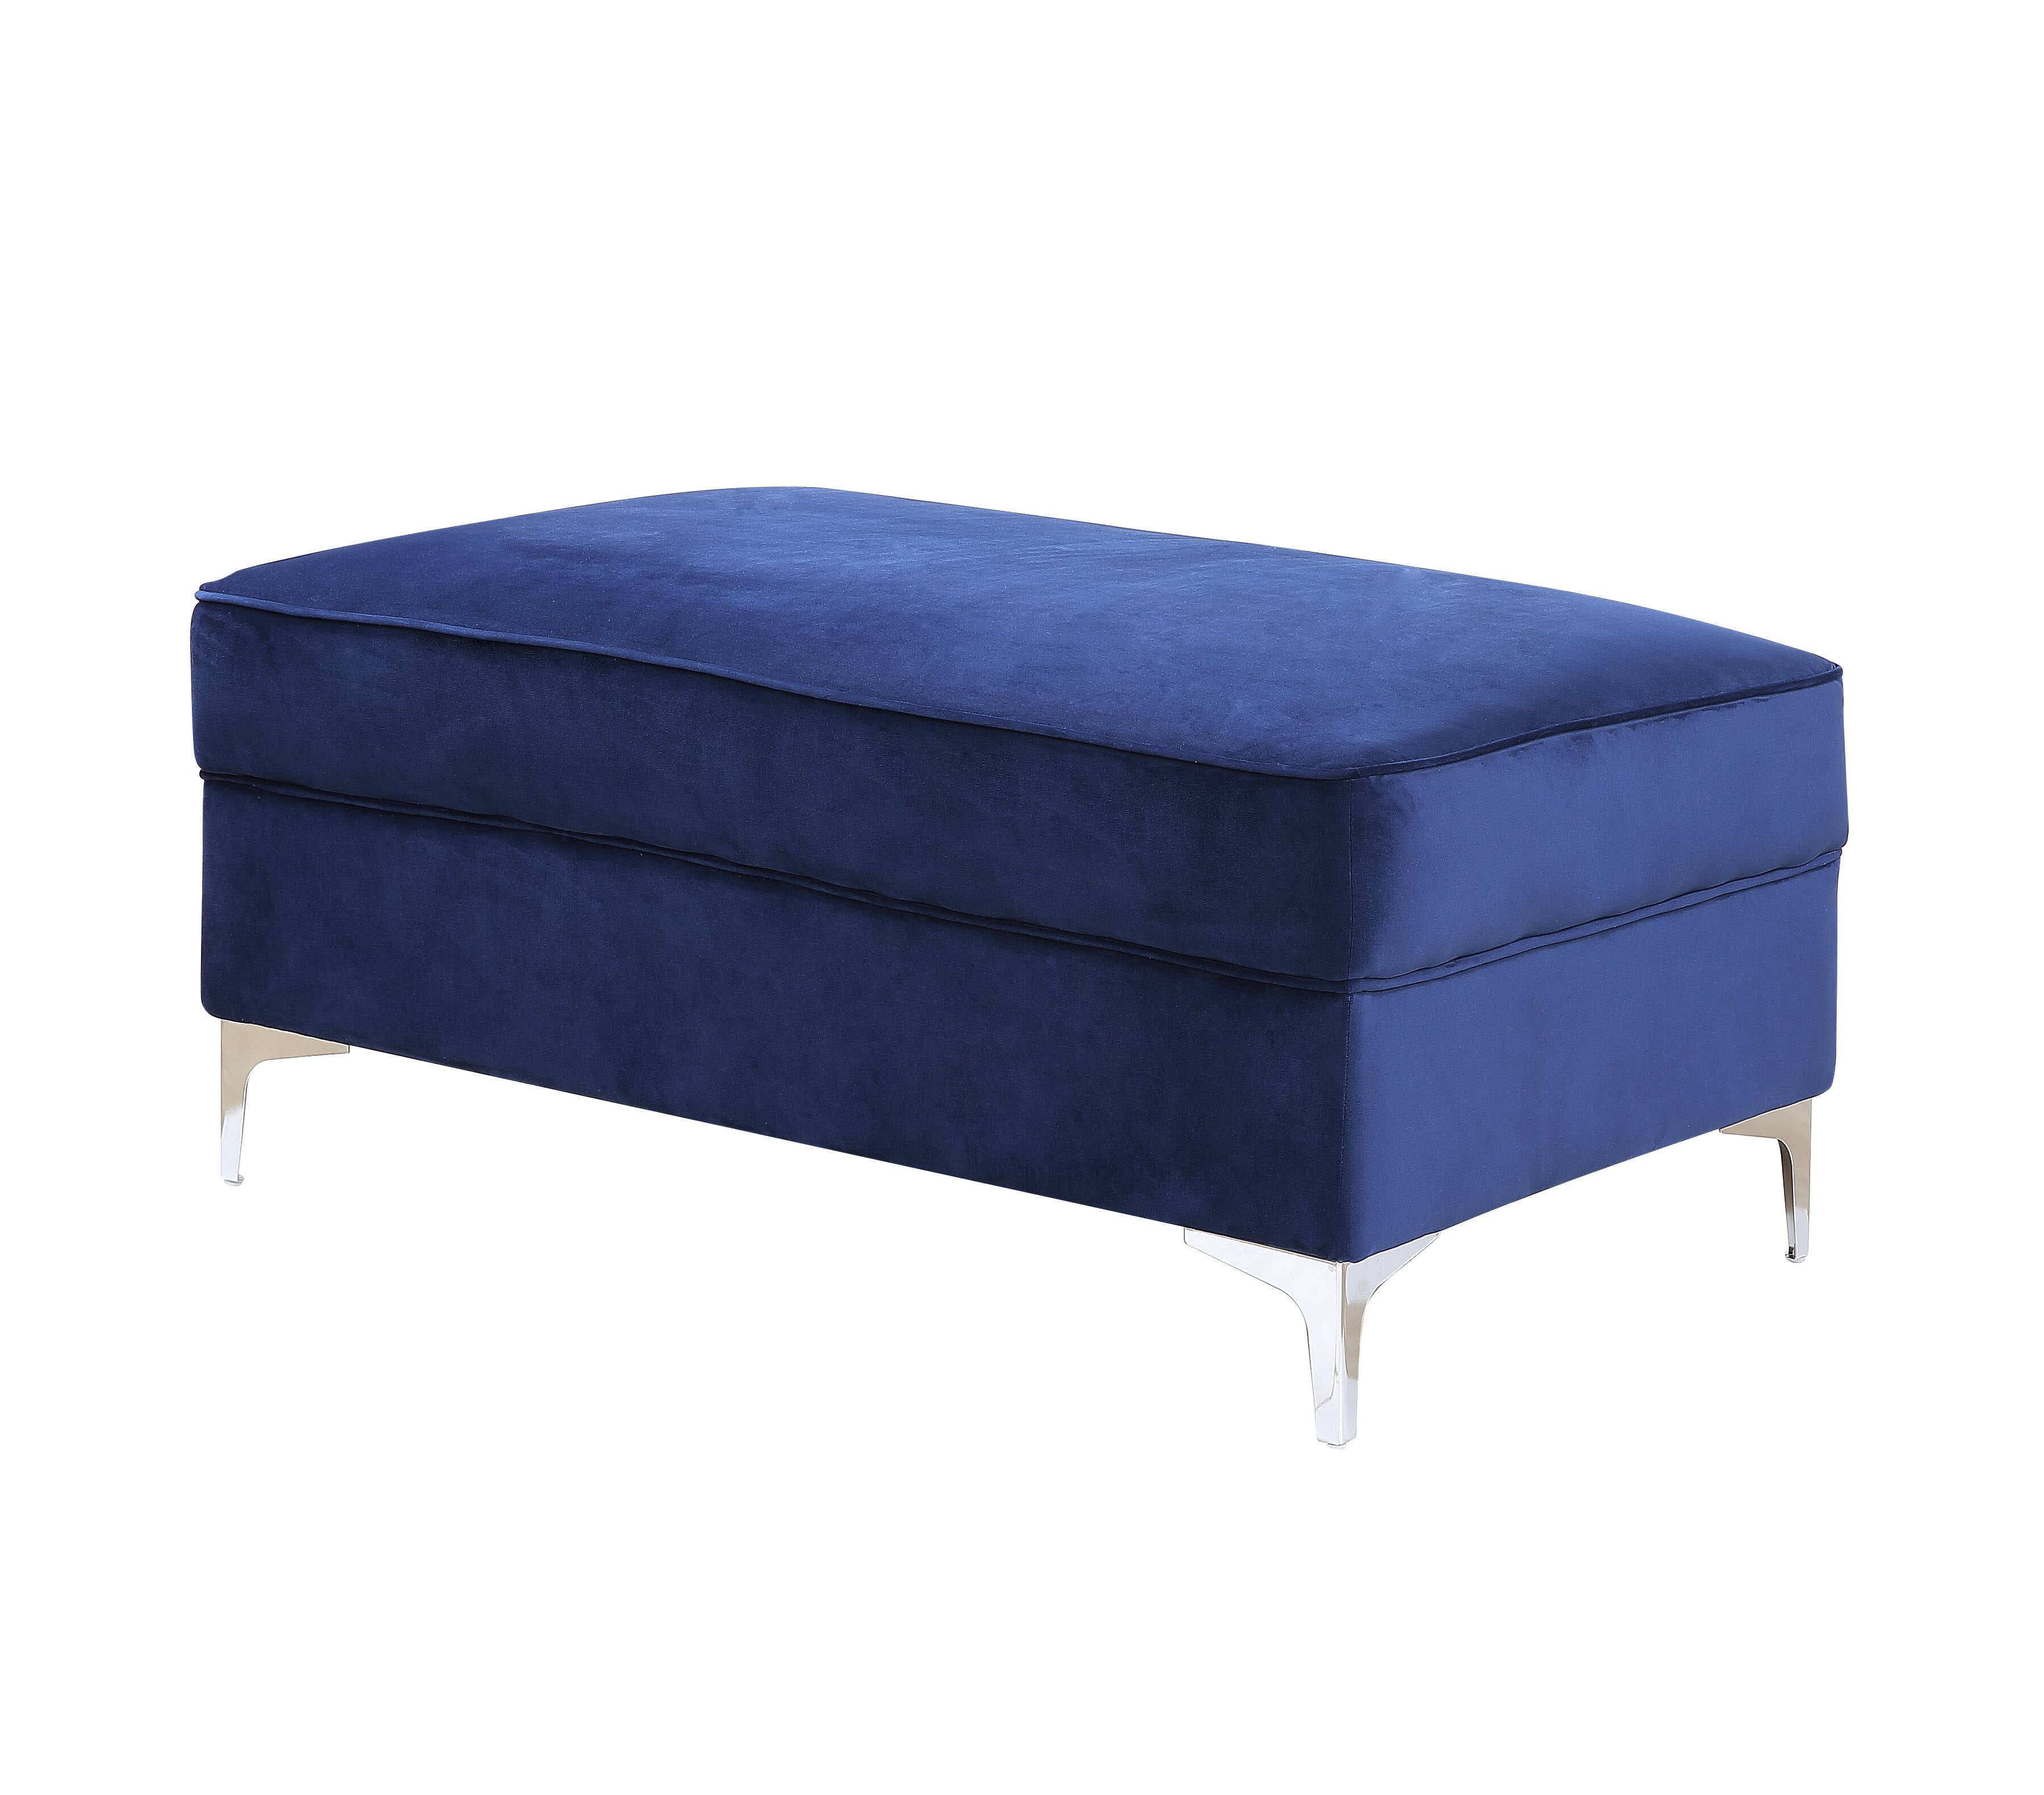 Picture of Acme Furniture LV00367 45 x 28 x 20 in. Bovasis Ottoman, Blue Velvet